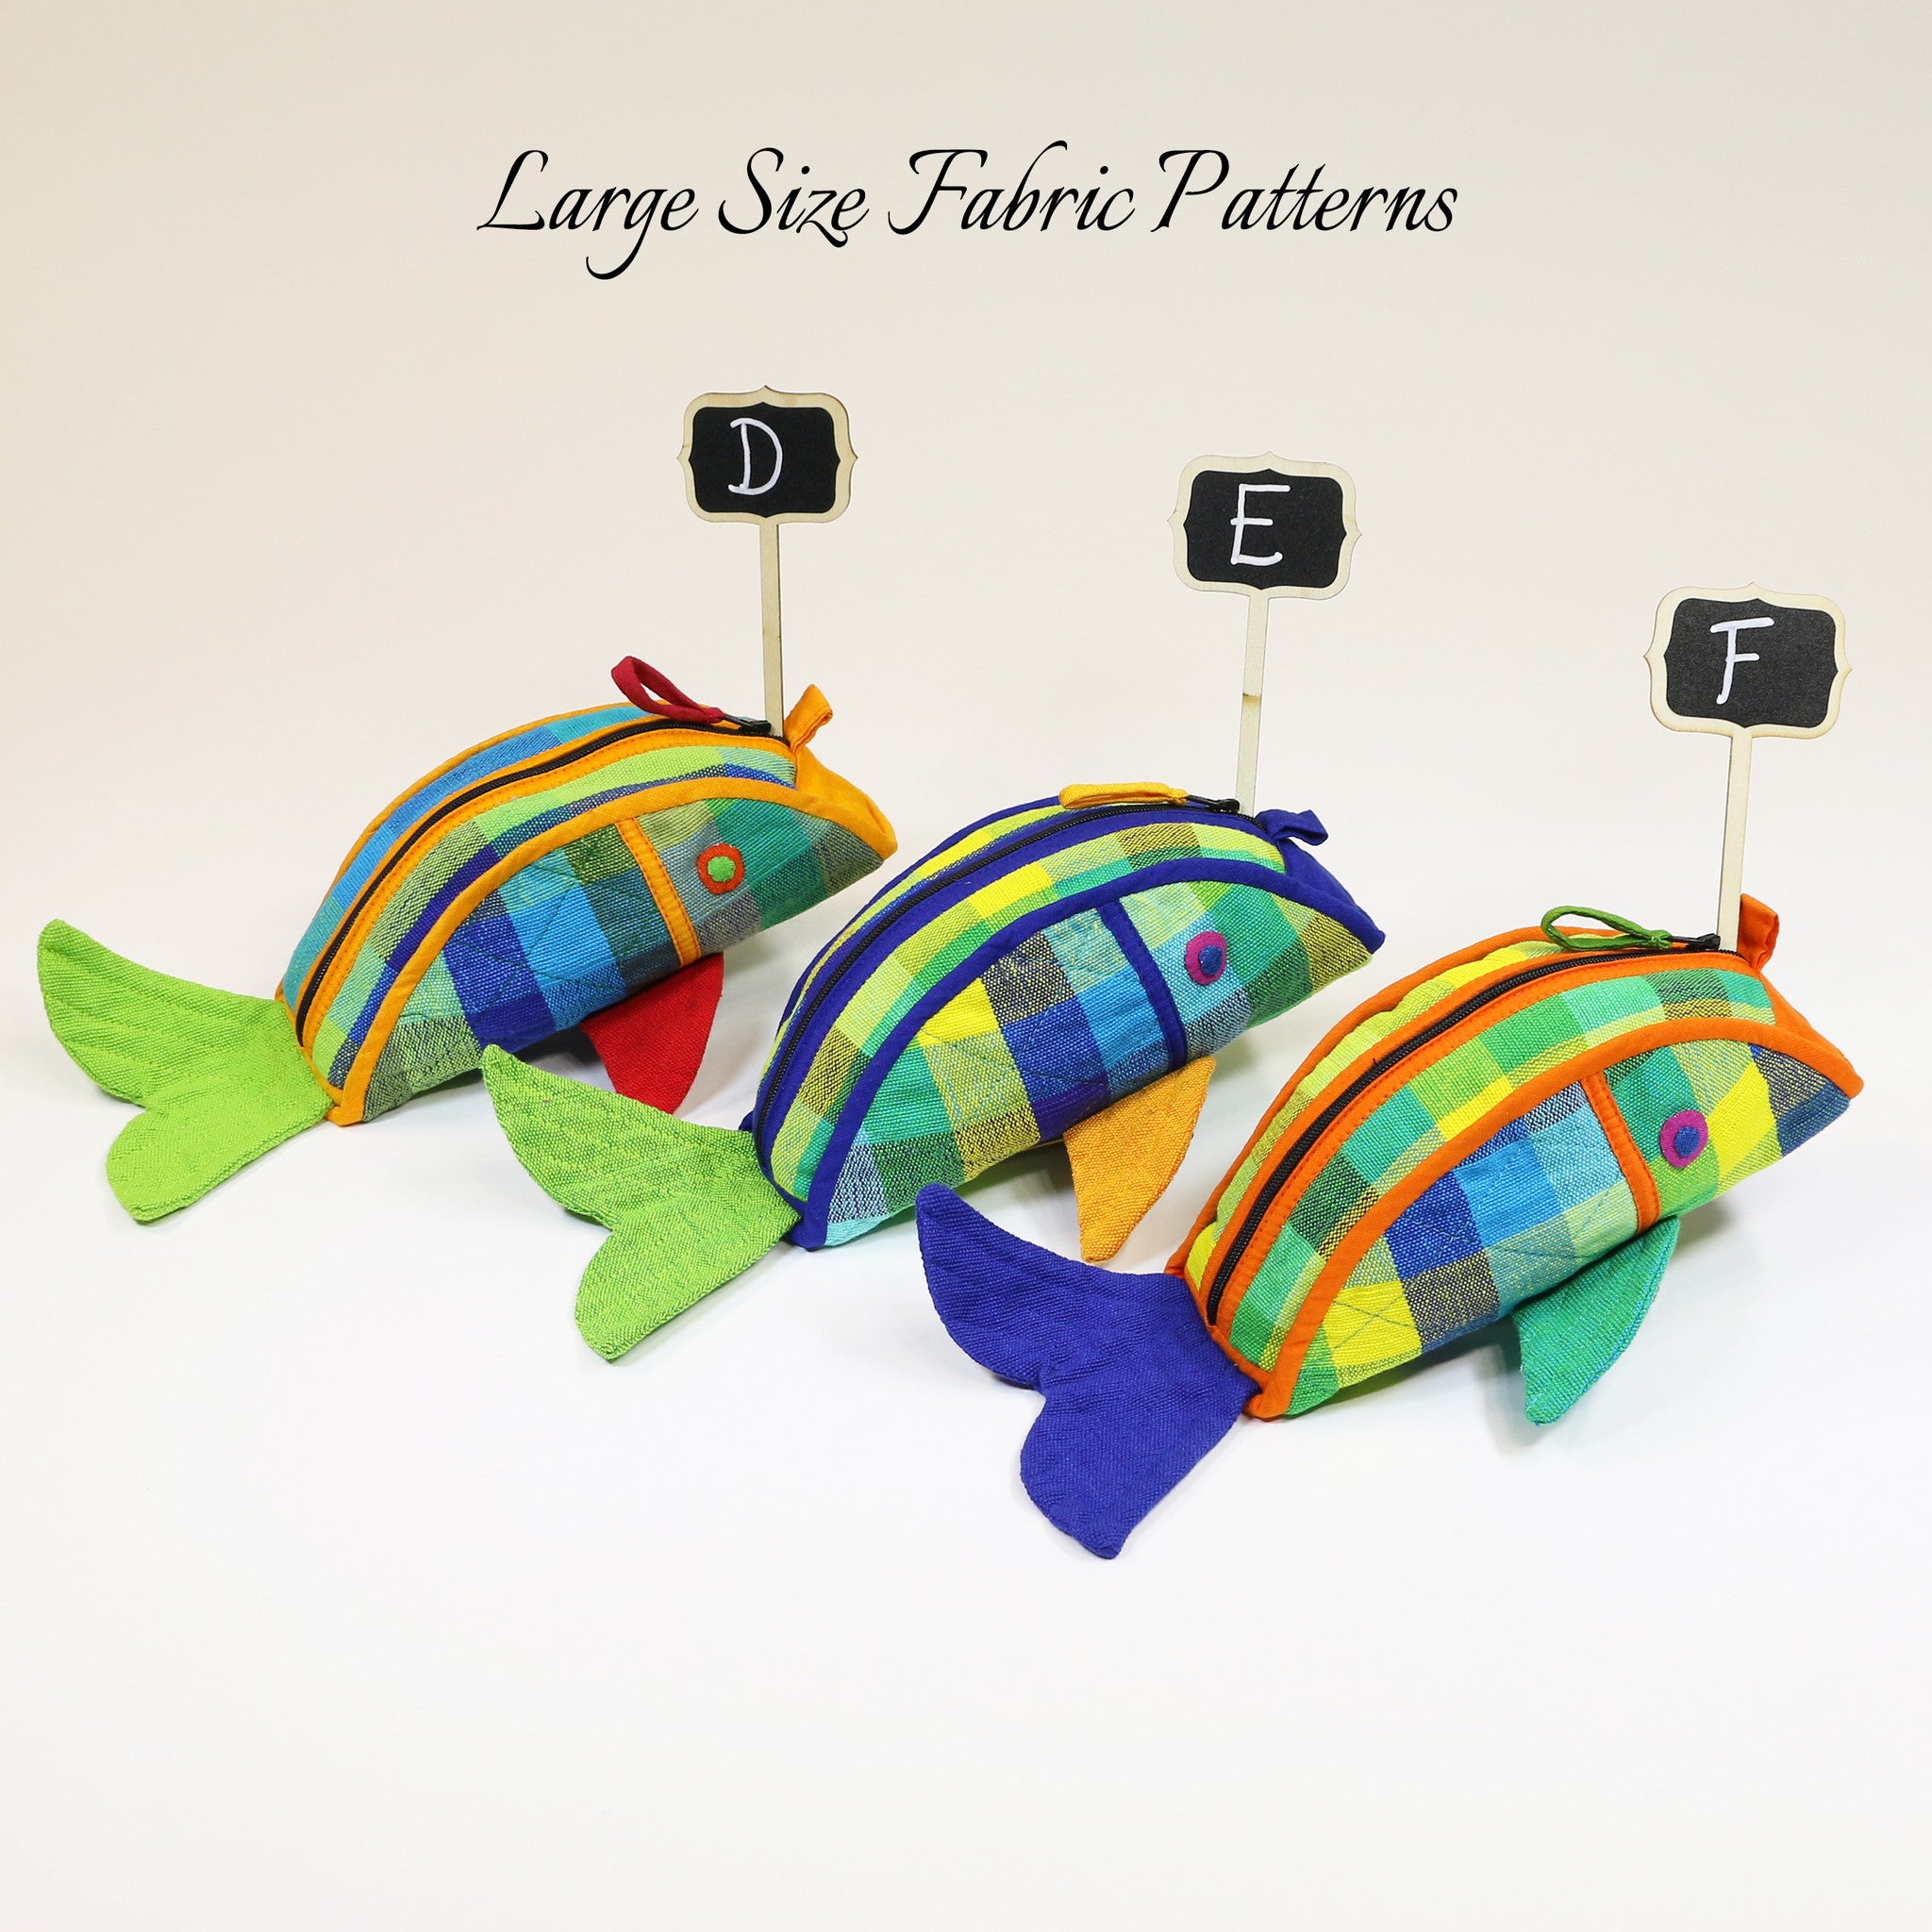 Fish Zip Pouch – large size Grasshopper fabric patterns shown